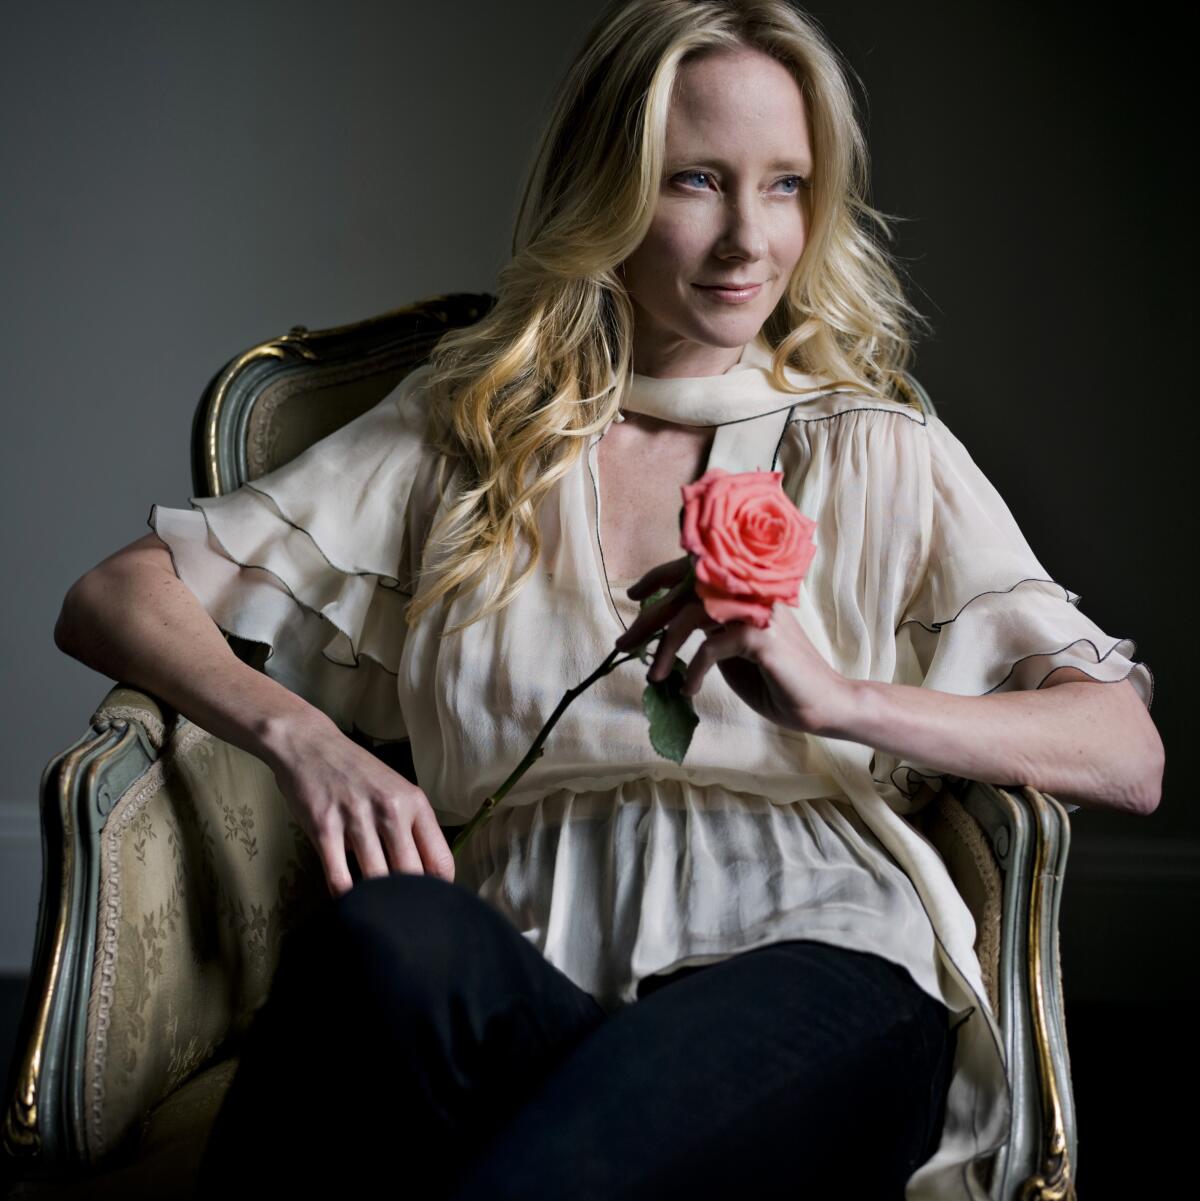 A woman holding a pink rose poses for a portrait